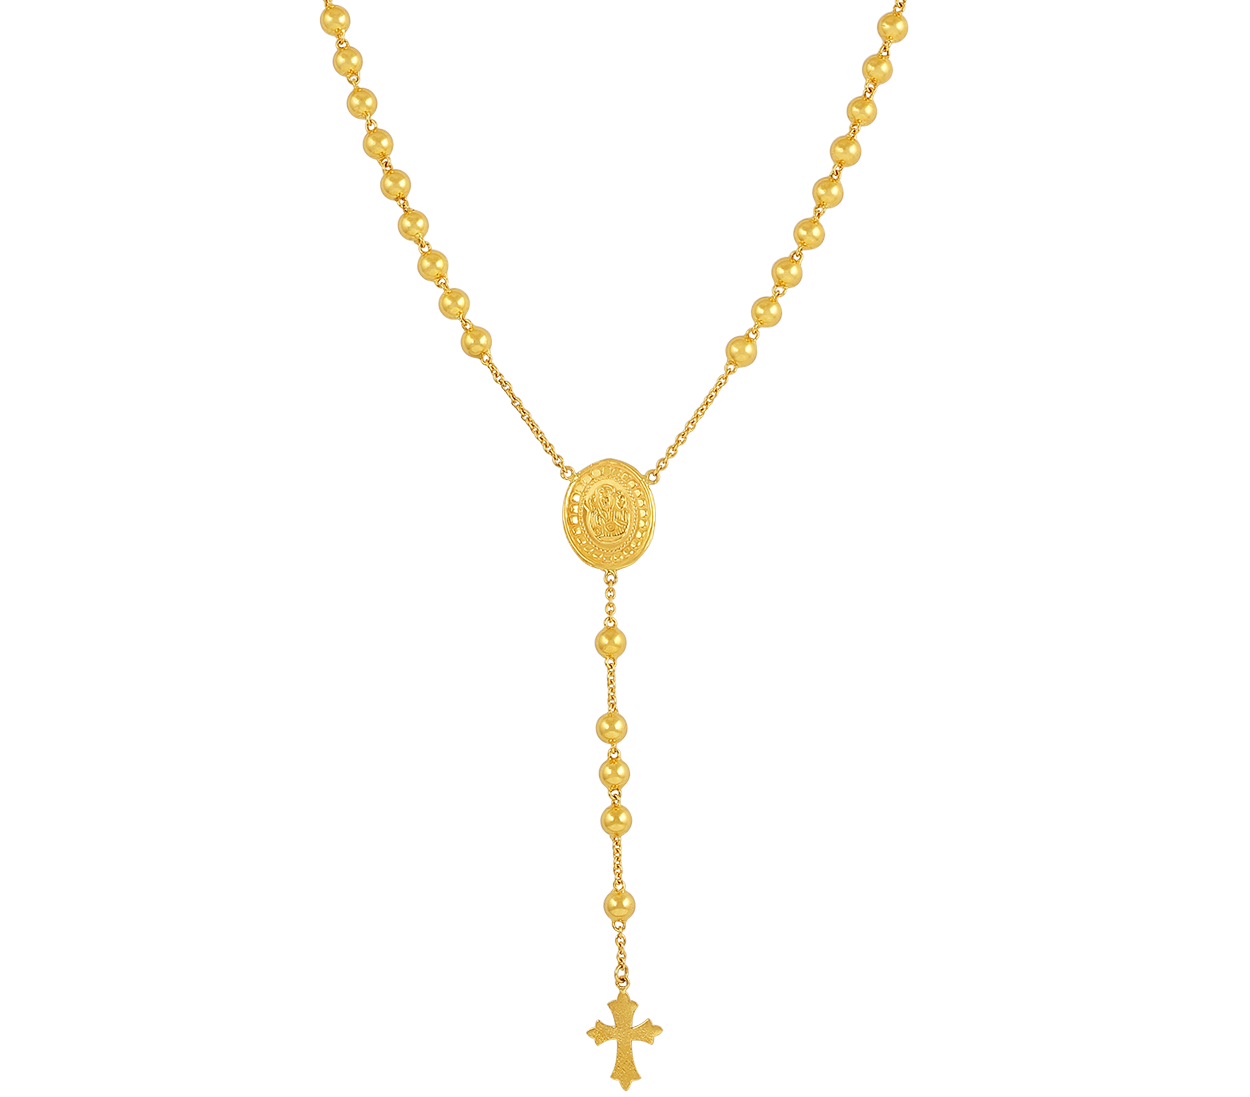 18K YELLOW GOLD ROSARY NECKLACE MIRACULOUS MARY MEDAL & JESUS CROSS ITALY  MADE | eBay